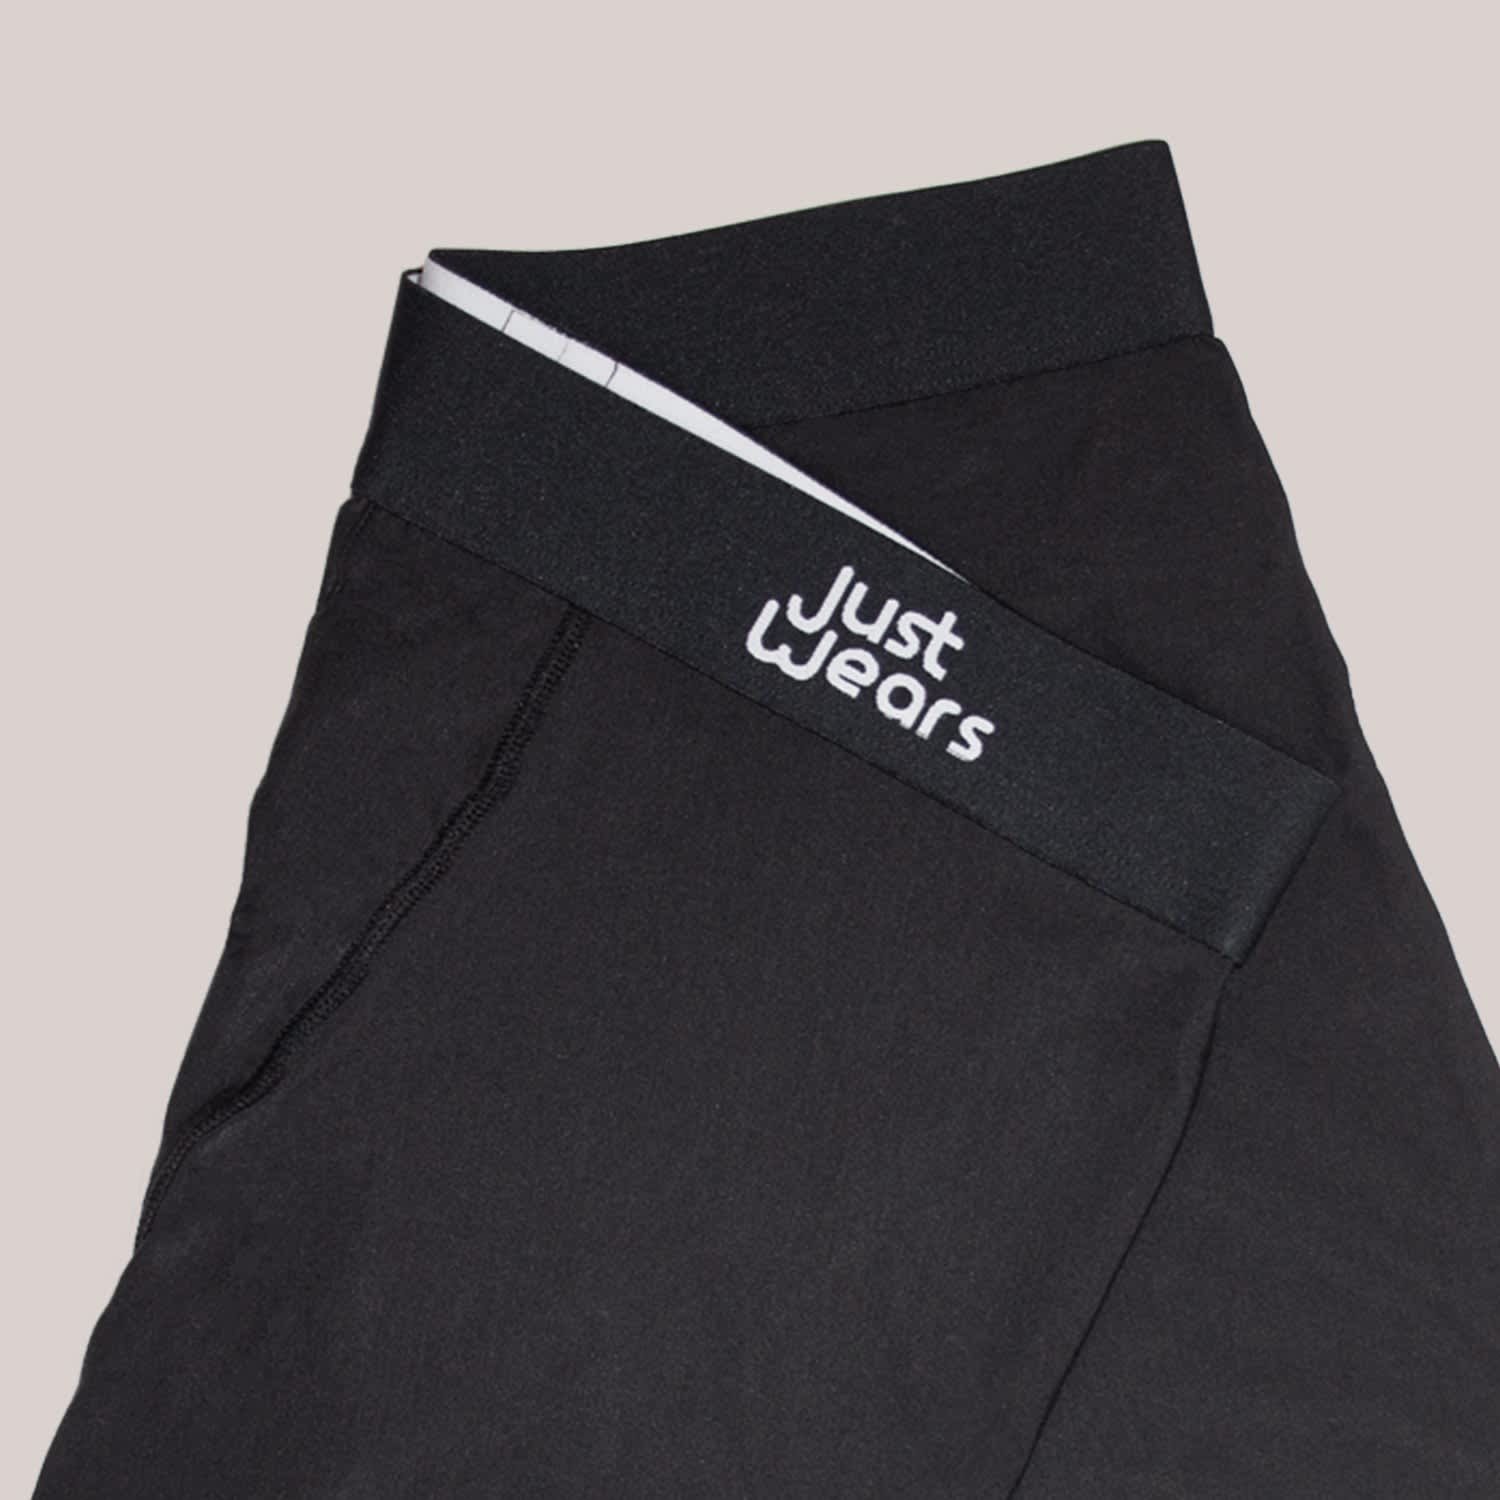 Super Soft Boxer Briefs With Pouch - Anti-Chafe & No Ride Up